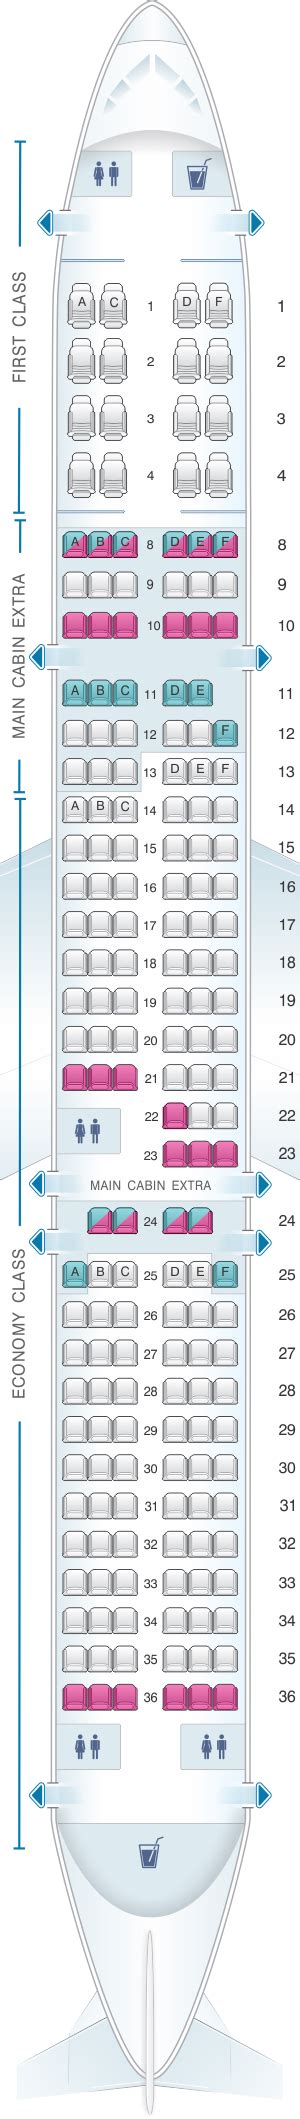 A321 seat map american. Now AA applied the same magic on its new 787-800 squeezing one extra seat in for each economy row, 3-3-3 hence 9 seats per row, comparing to JAL 787-800's 2-4-2, 8 seats per row in economy. Shame on American Airlines! Submitted by SeatGuru User on 2015/06/16. We flew this plane DFW to LHR, both ways. 